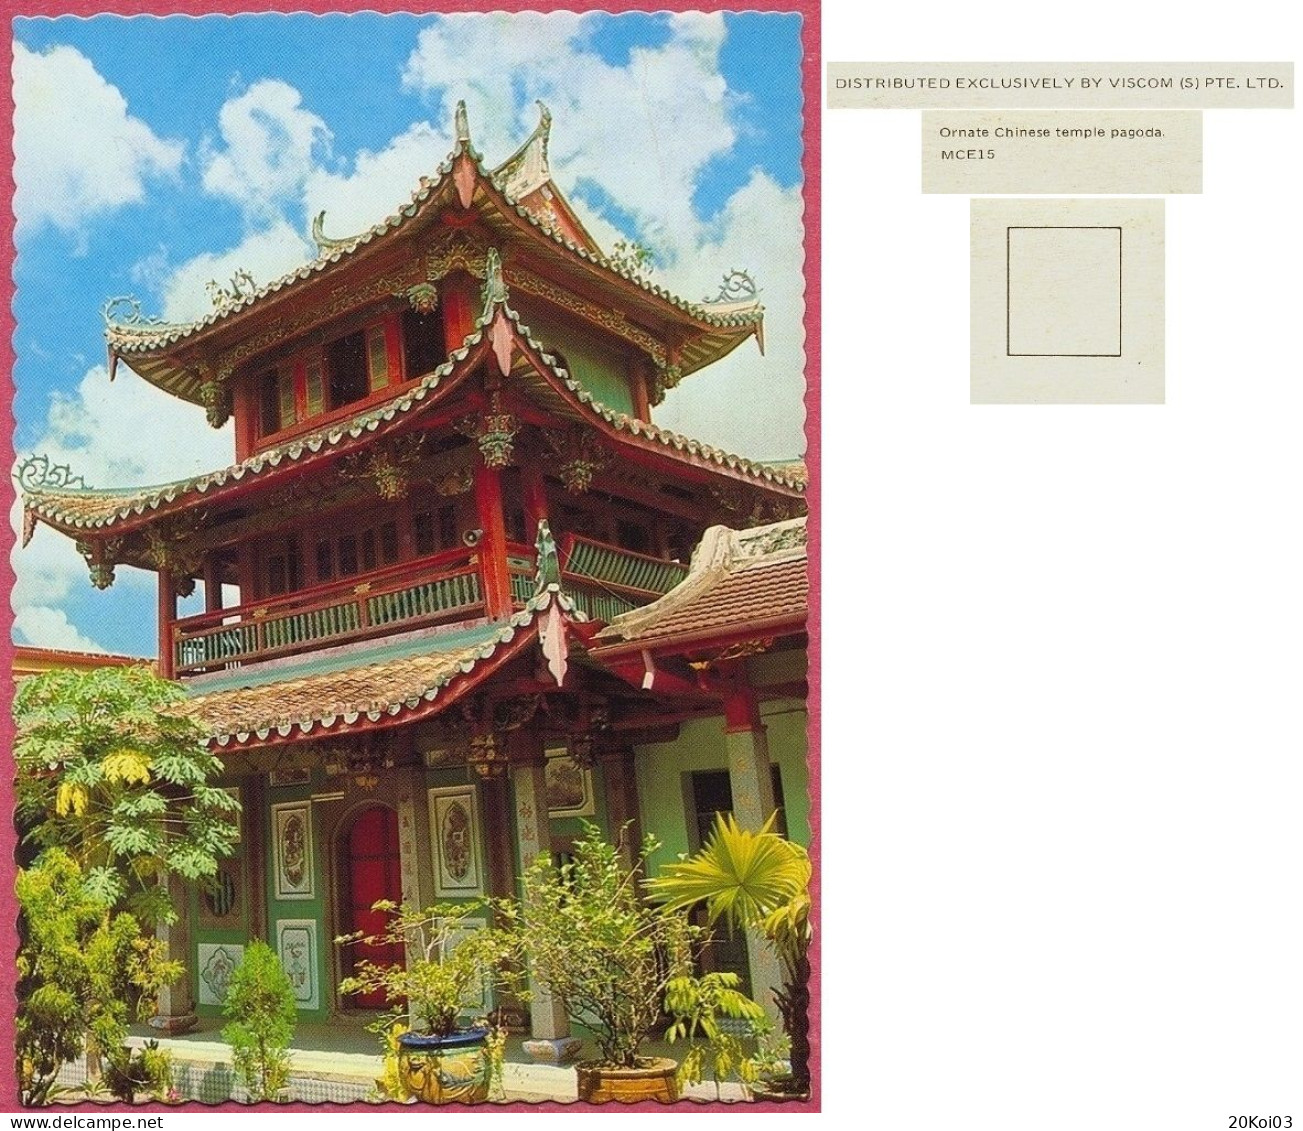 Singapore Ornate Chinese Temple Pagoda 1978's MCE15 DISTRIBUTED EXCLUSIVELY BY VISCOM (S) PTE. LTD. Vintage_cpc - Singapour